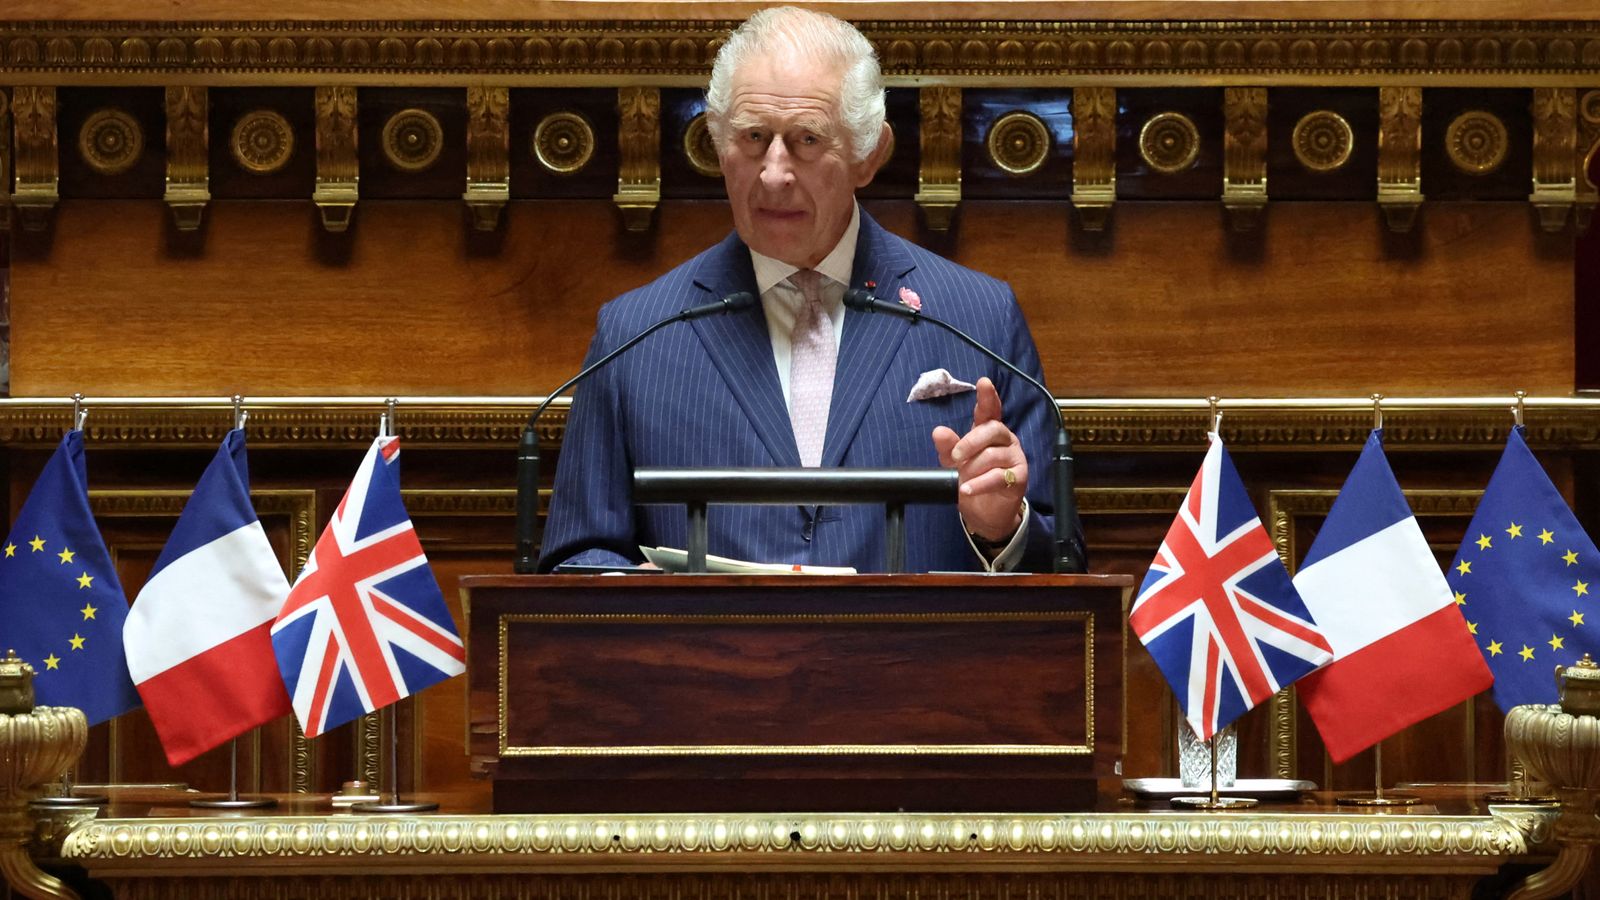 King Charles says UK will 'always be one of France's closest allies and best friends' in historic speech to Senate